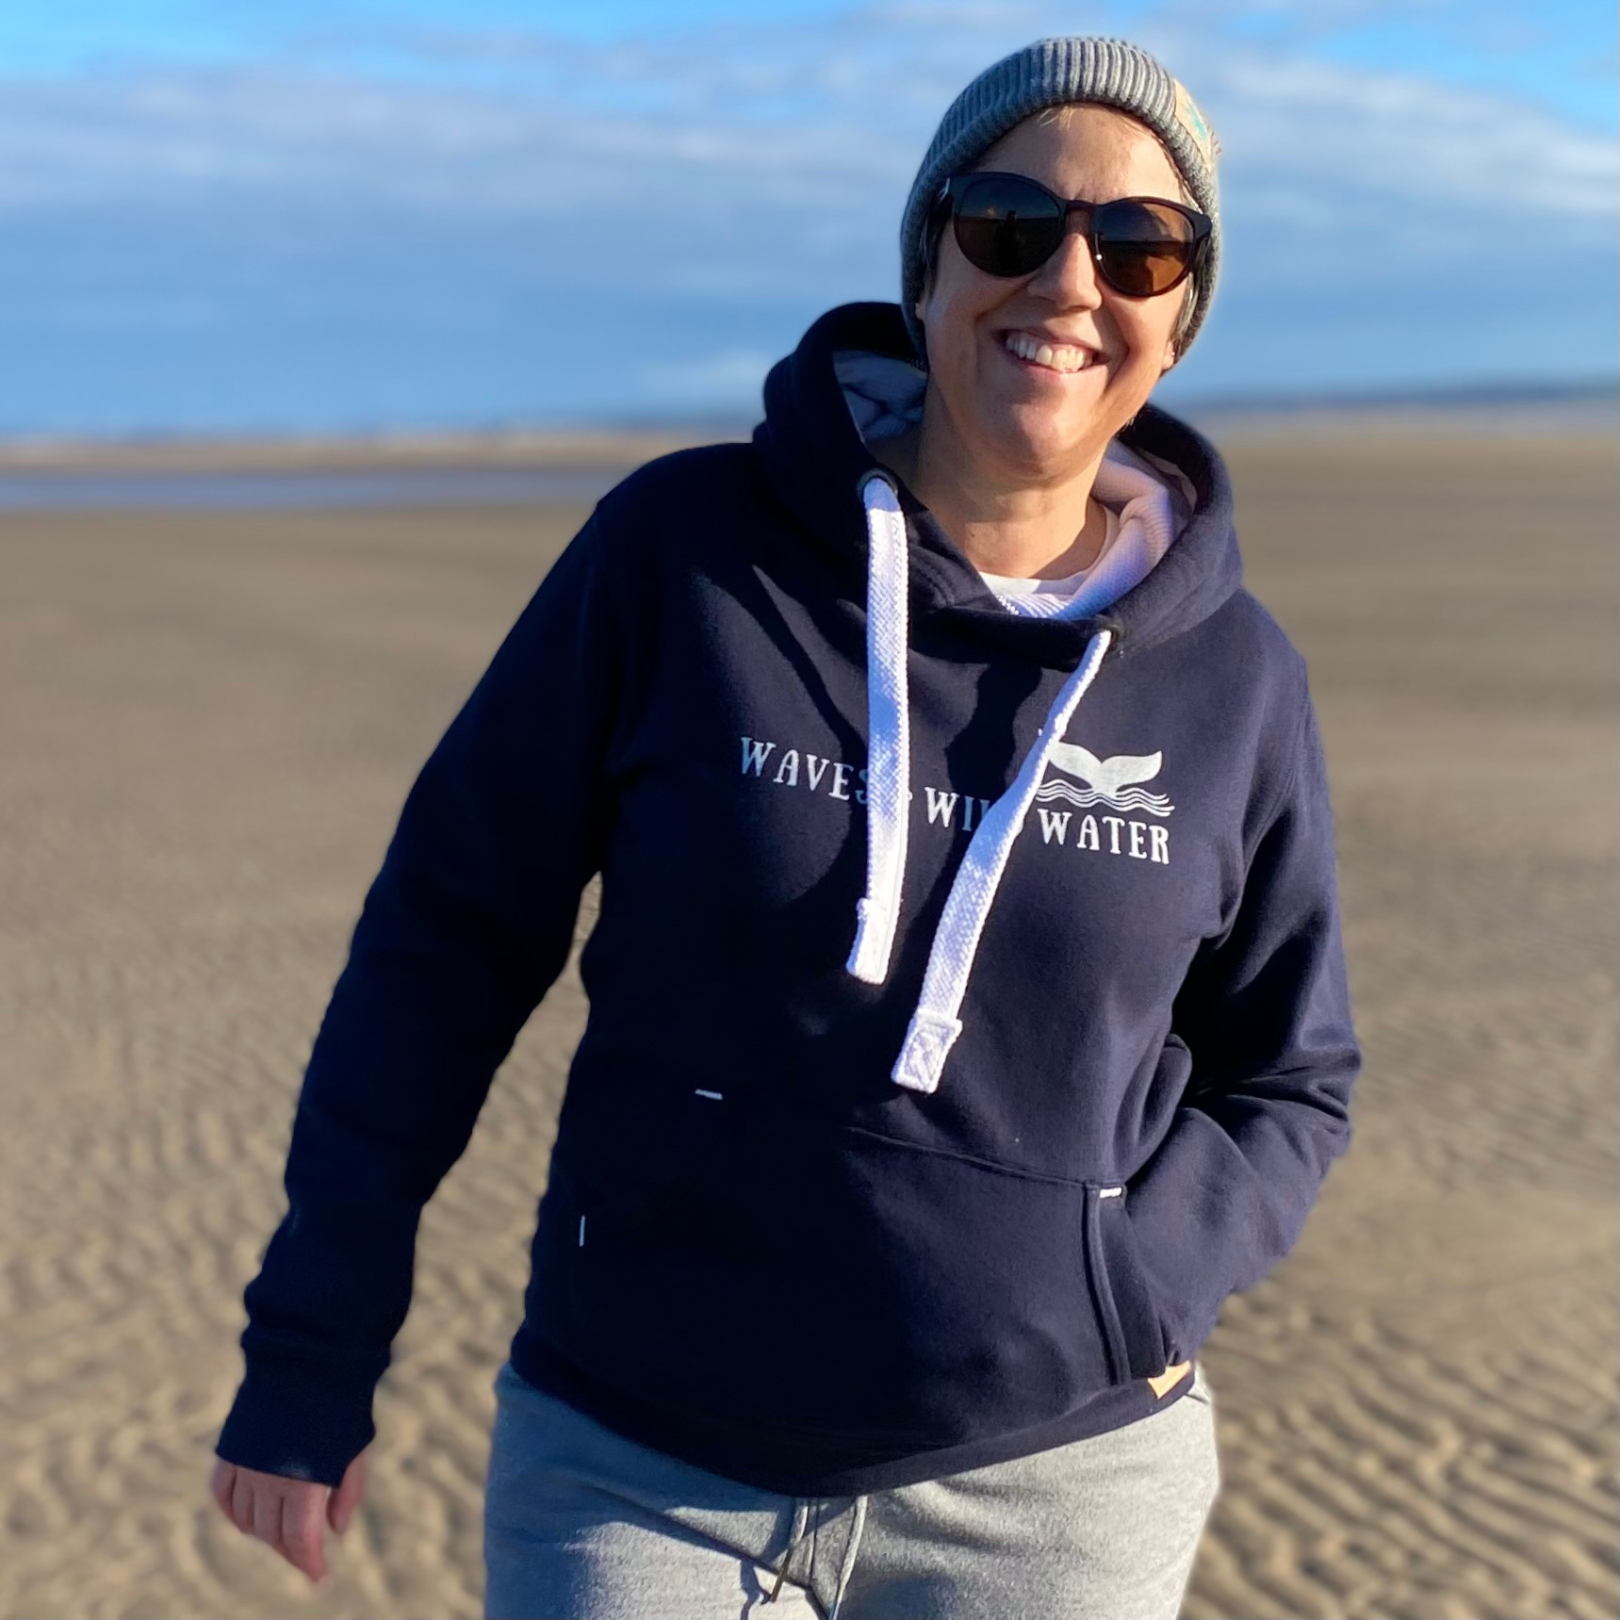 A woman on a beach wearing a navy blue hoodie with Waves & Wild Water printed across the front in metallic silver ink.